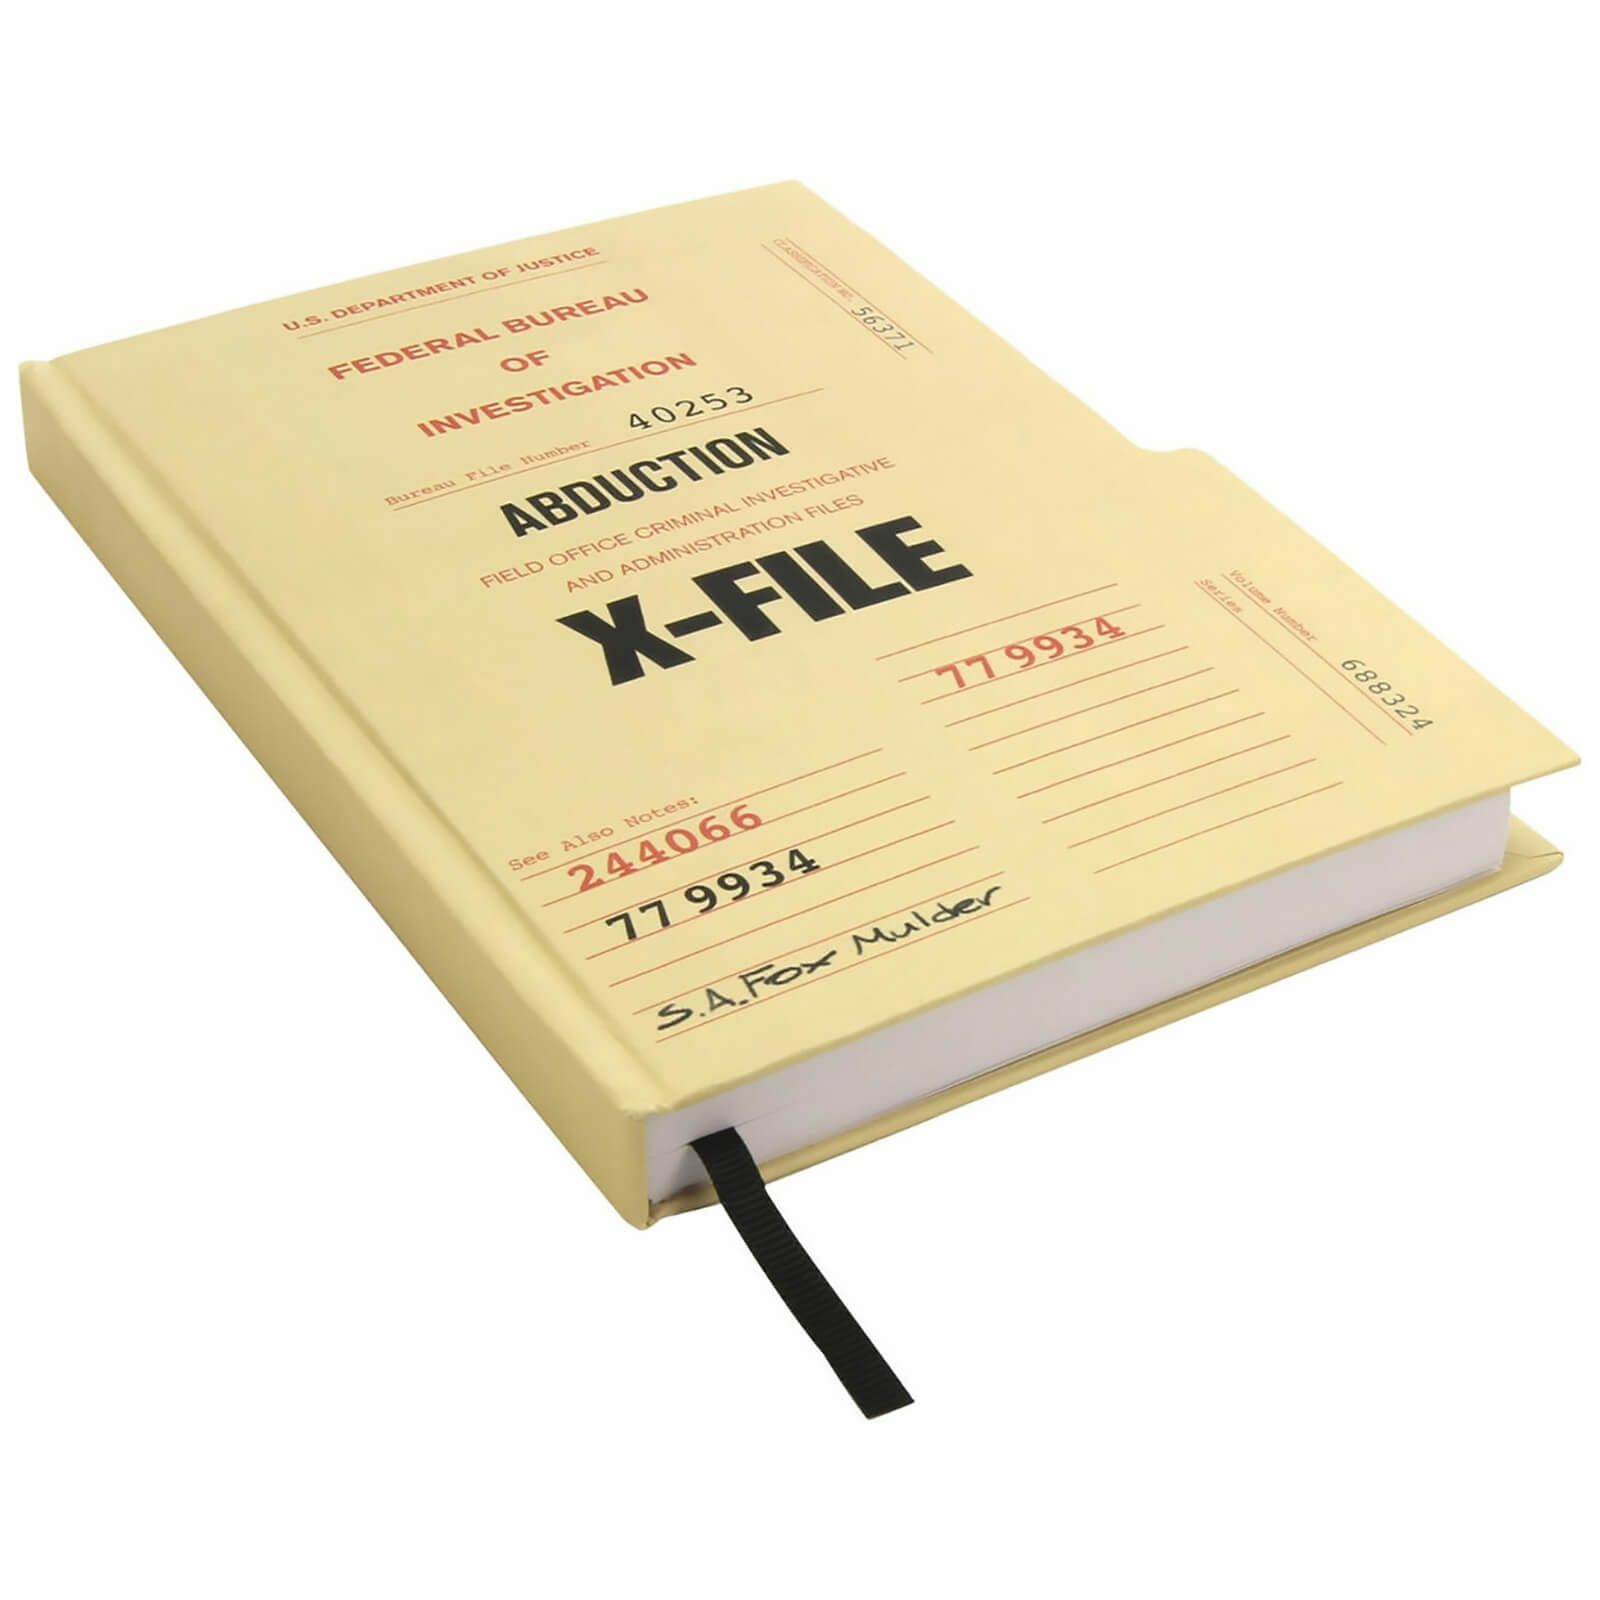 Coop X-Files Case File Journal Hardcover